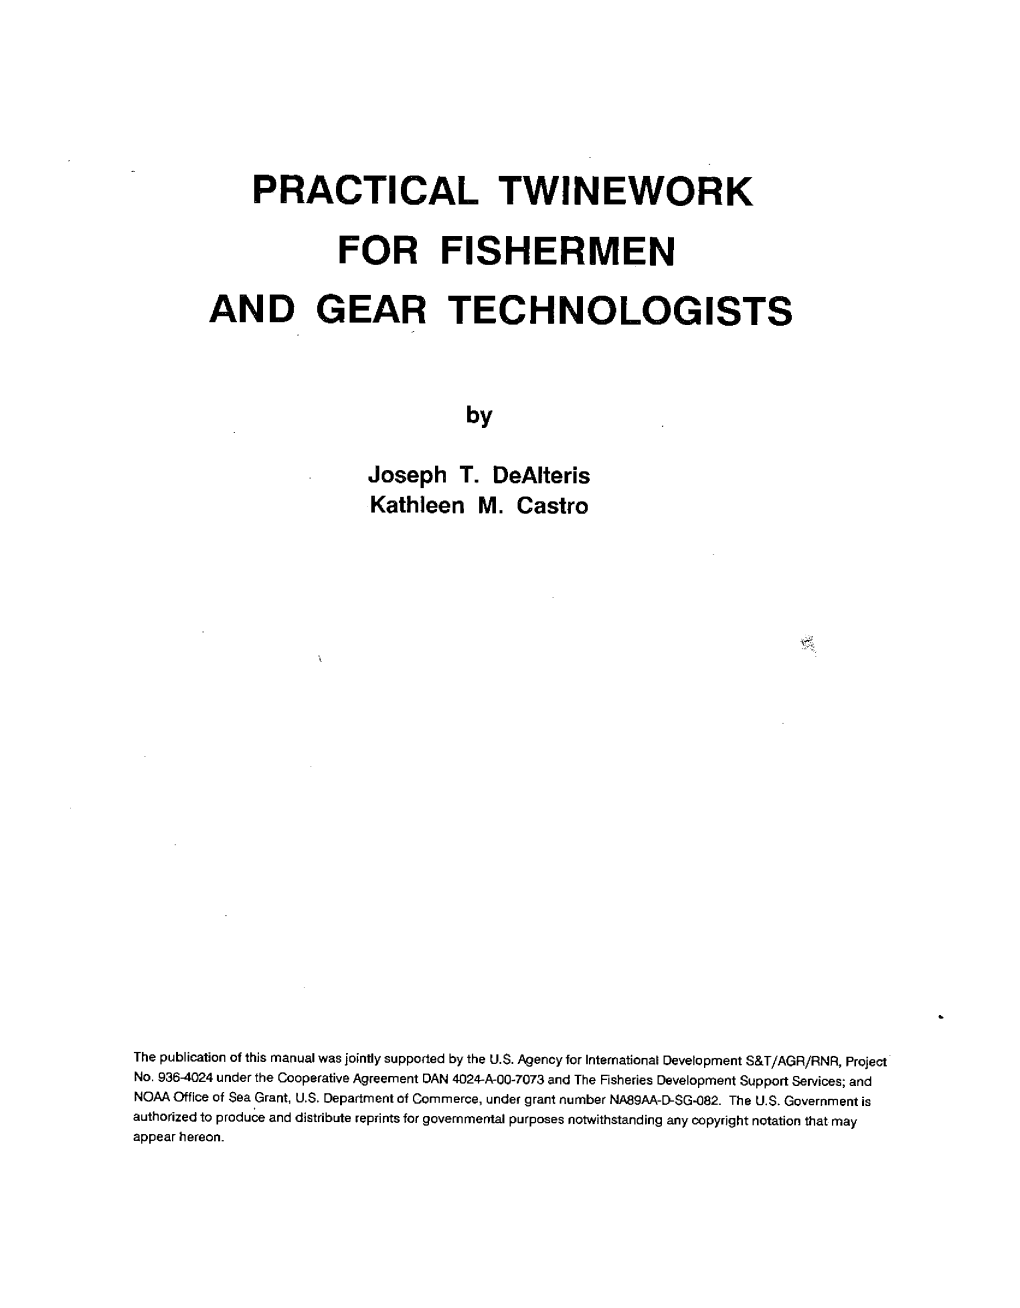 Practical Twinework for Fishermen and Gear Technologists